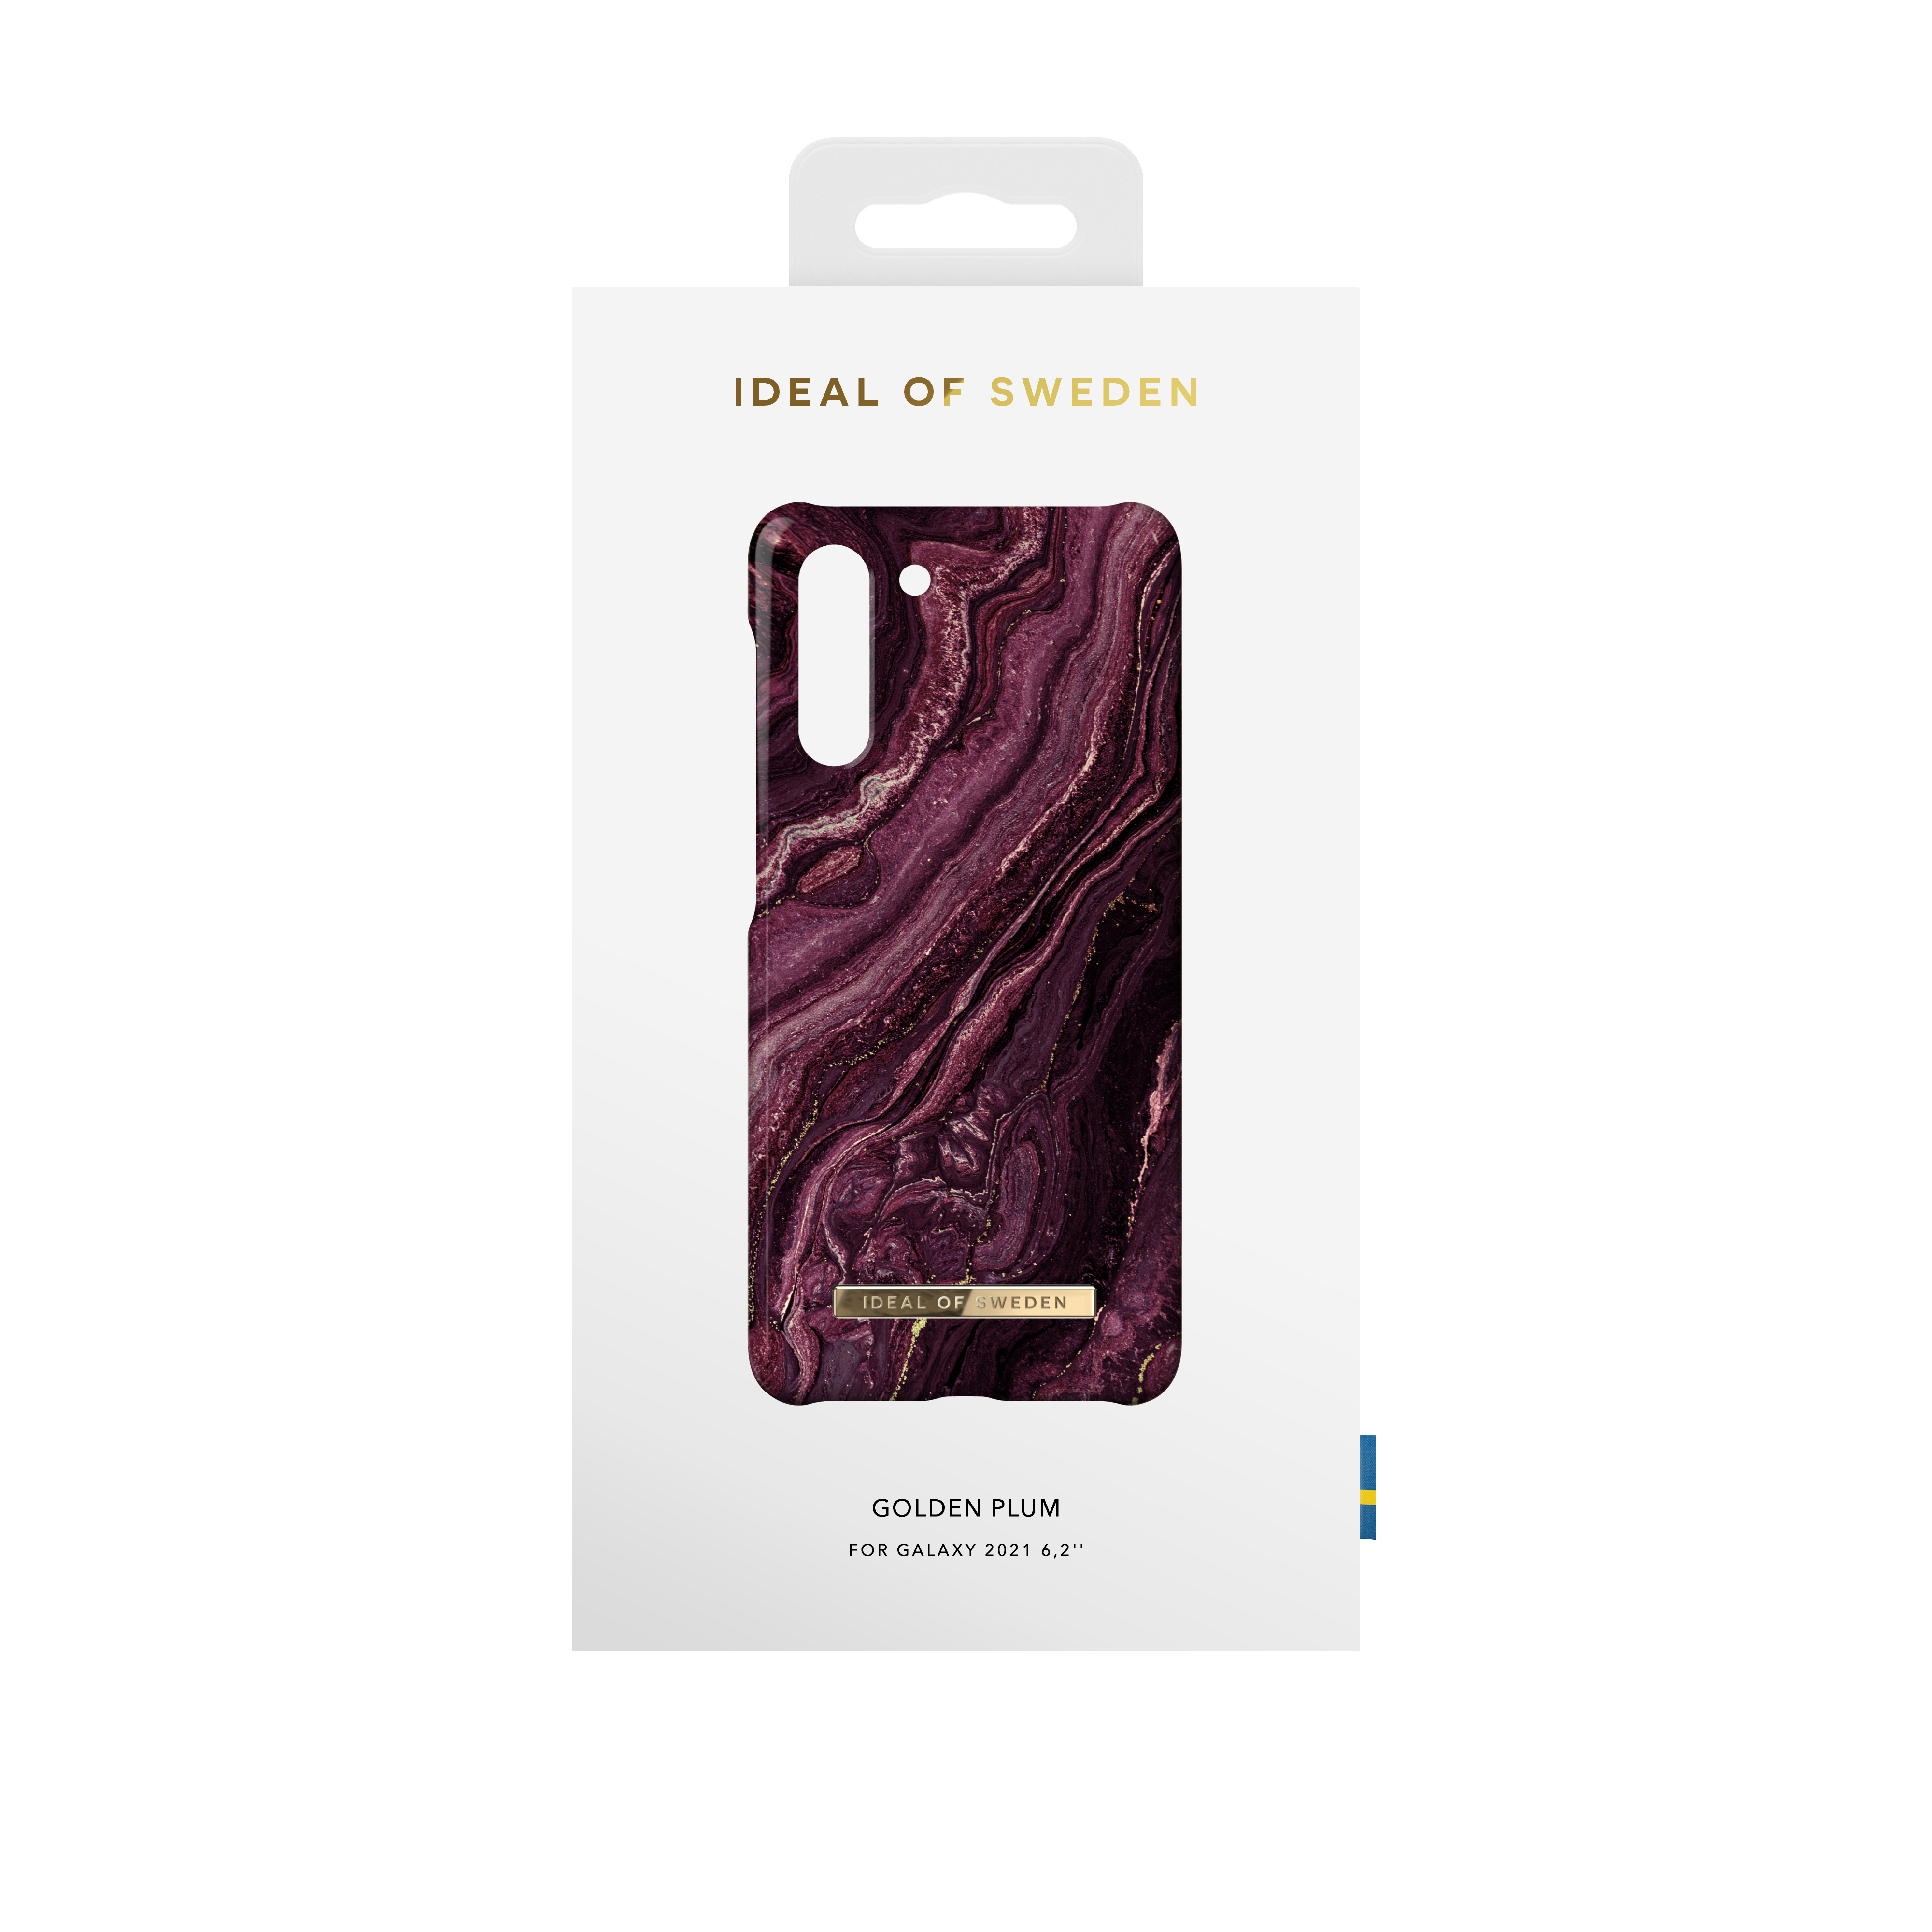 Case, Galaxy S21, OF Pflaume IDEAL SWEDEN Fashion Samsung, Backcover,